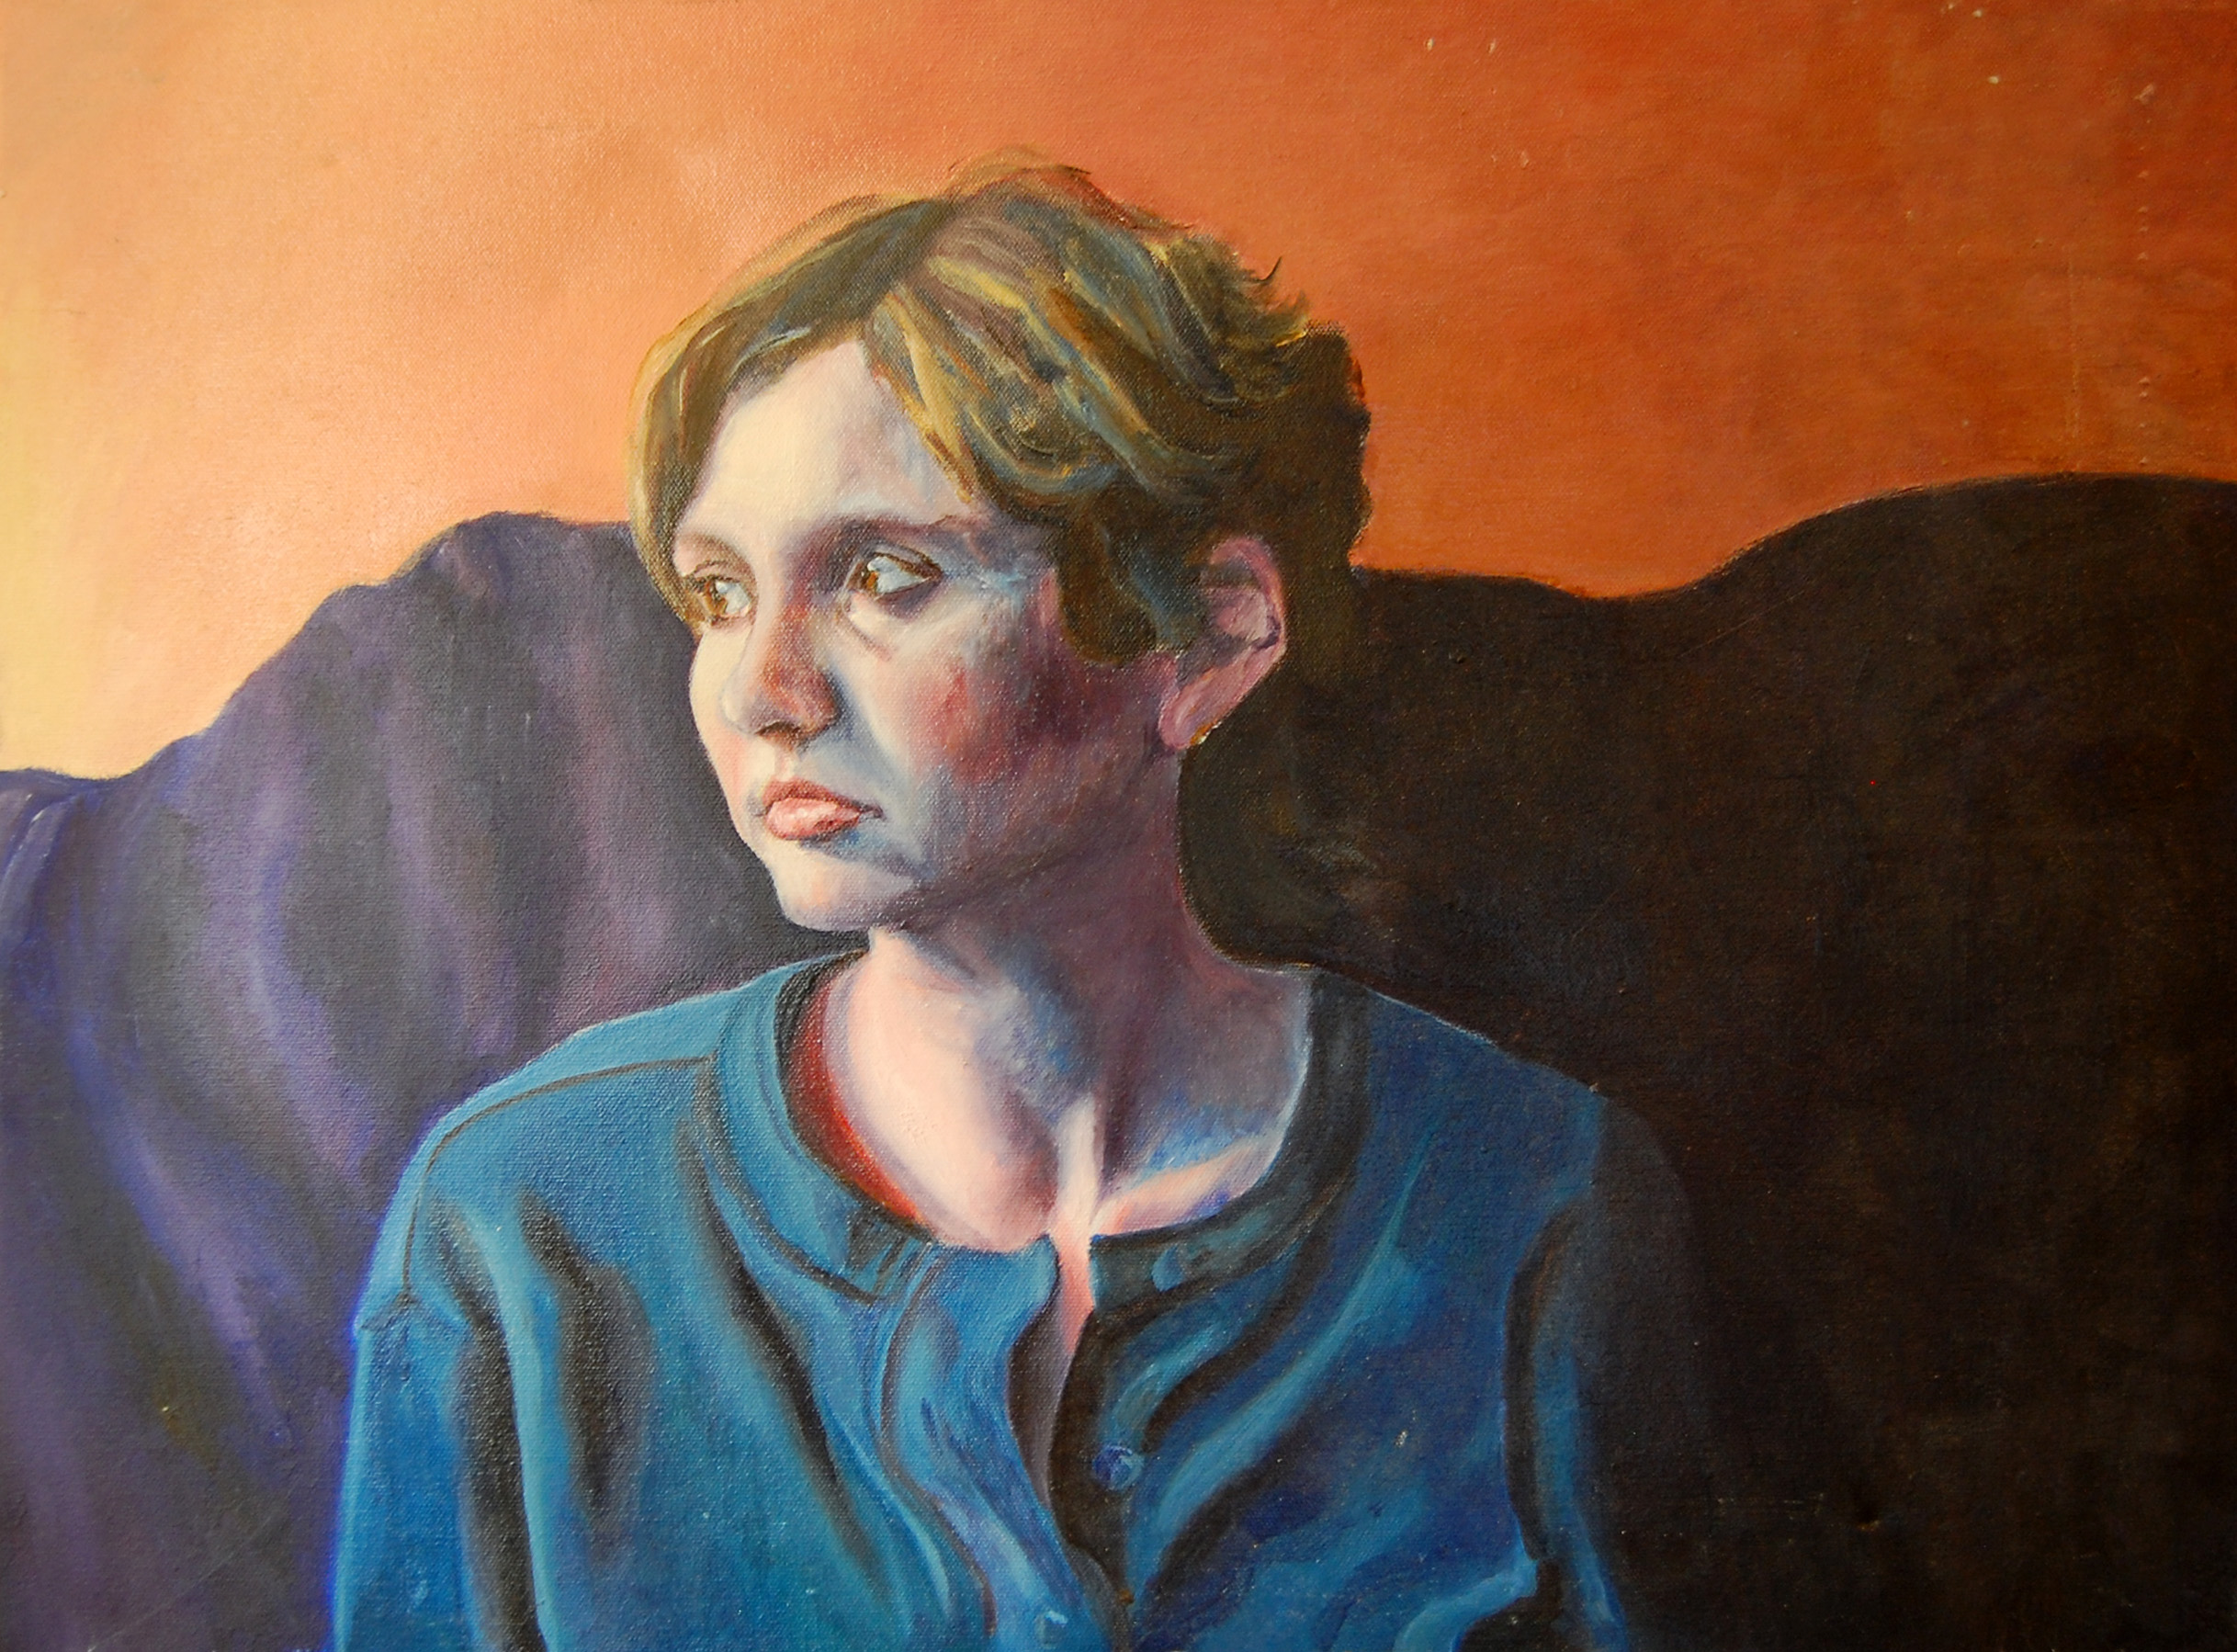 Oil painting self-portrait inspired by the song Lithium Sunset by Sting.